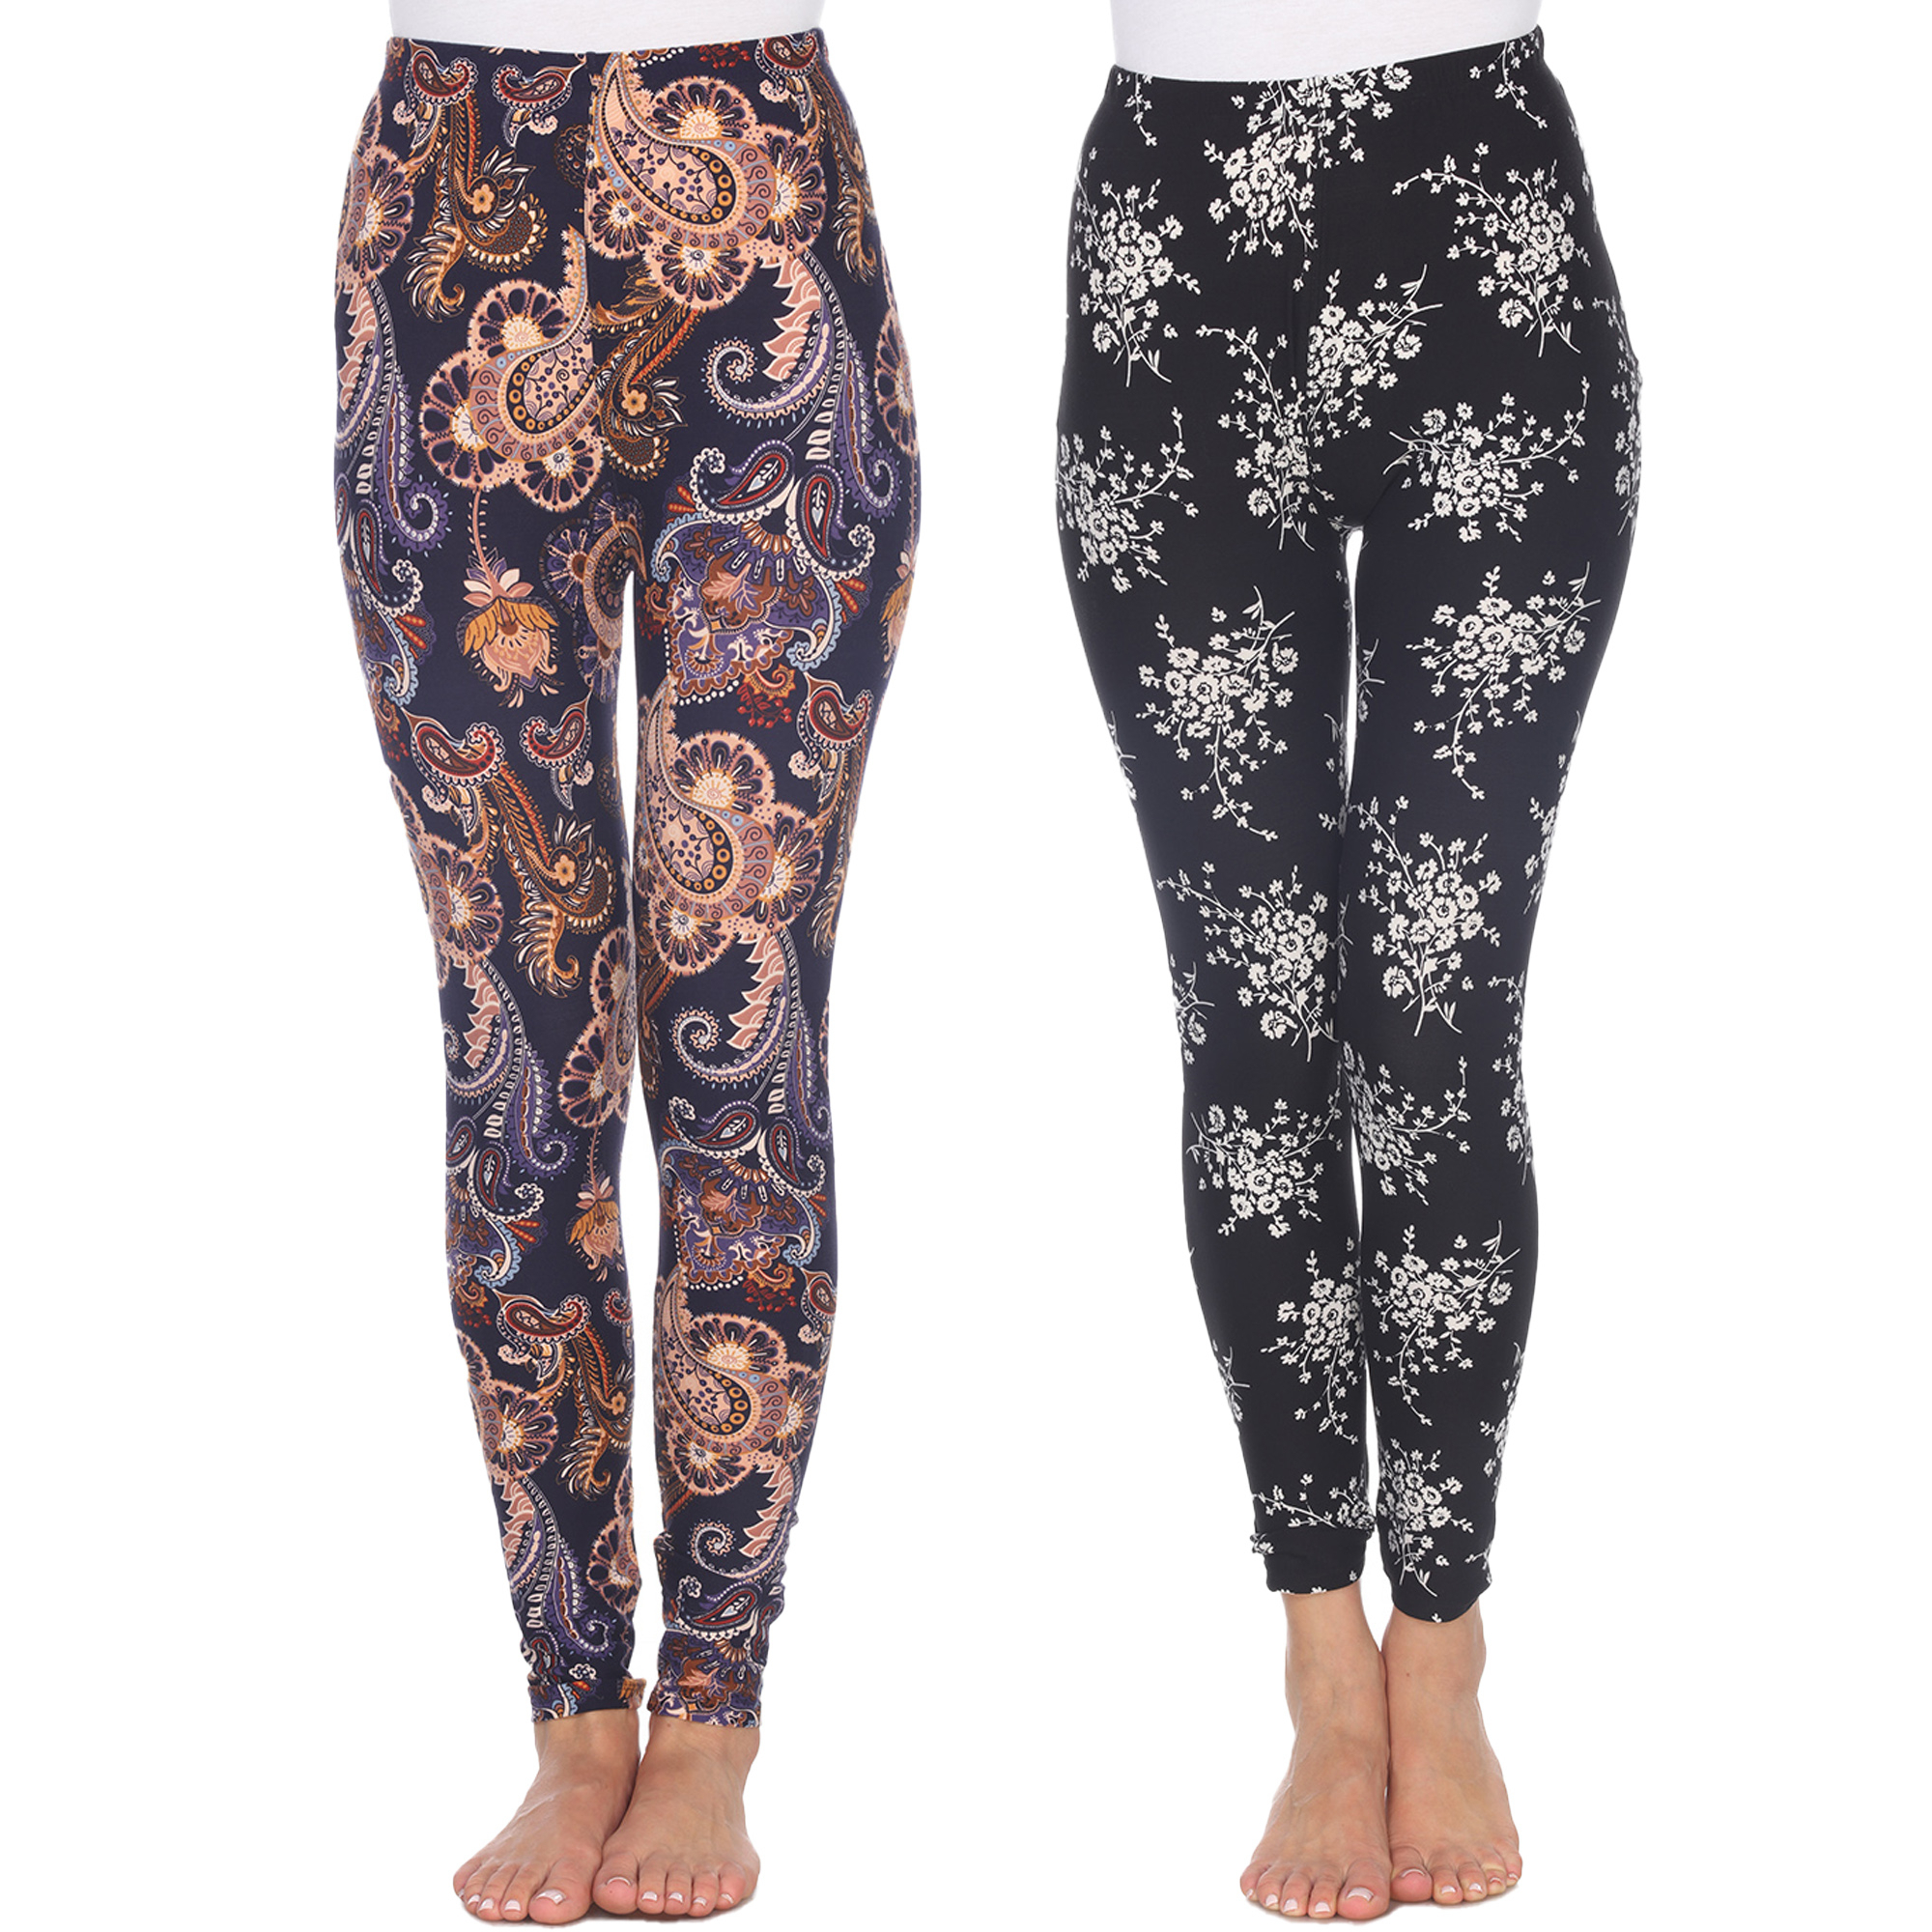 White Mark Women's Pack Of 2 Solid And Printed Leggings - Purple/Gold, Black/White Paisley, One Size - Regular